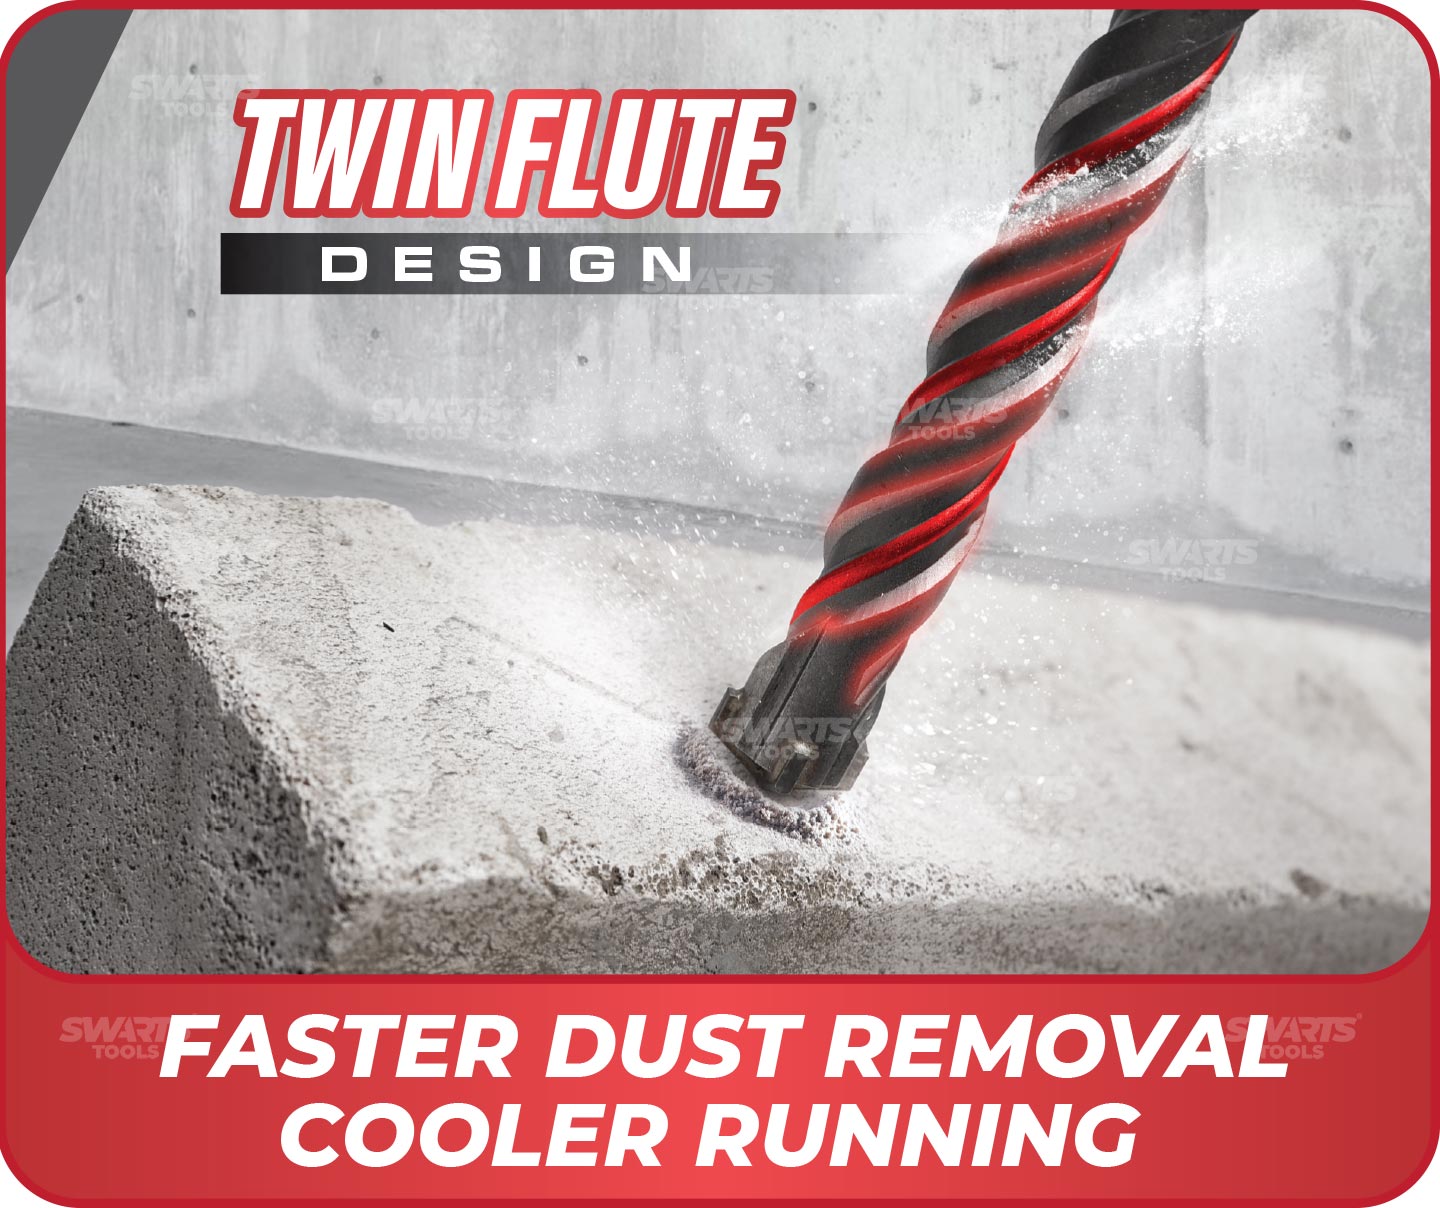 TWIN FLUTE DESIGN, FASTER DUST REMOVAL COOLER RUNNING